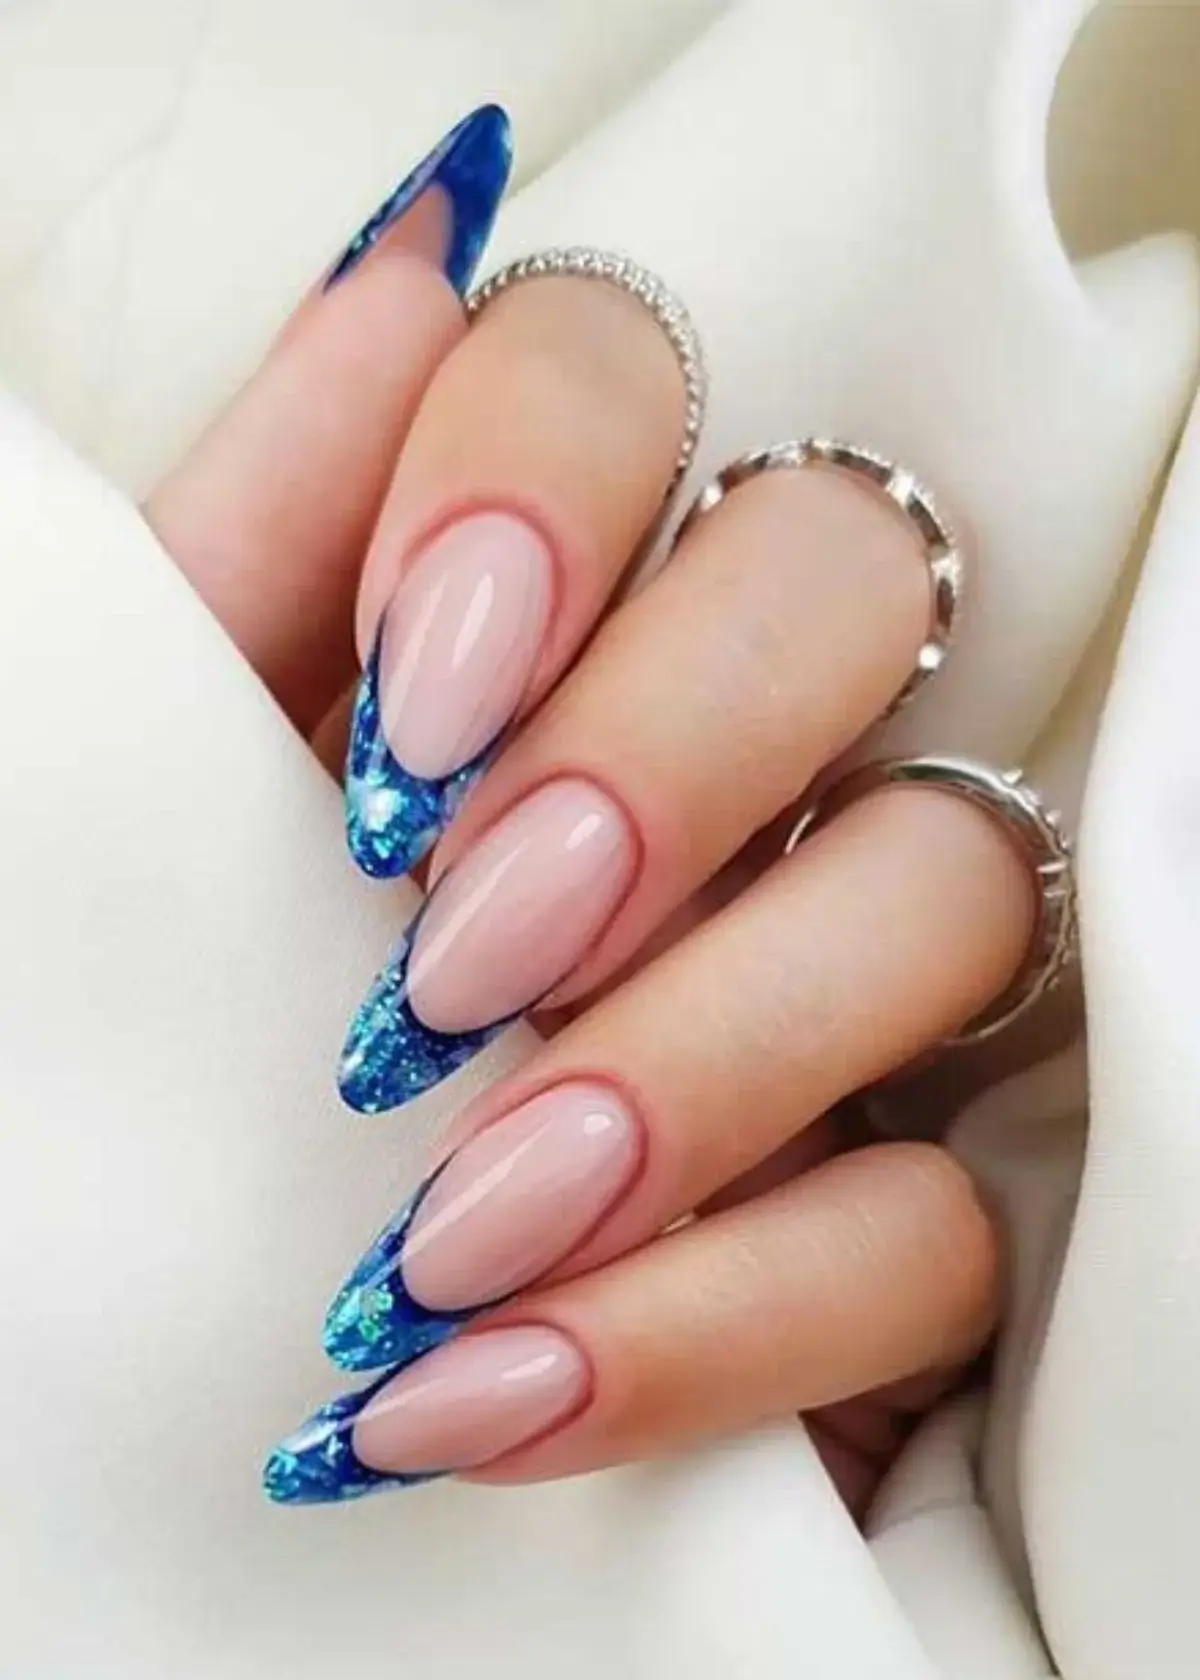 How to choose the right french manicure kit?